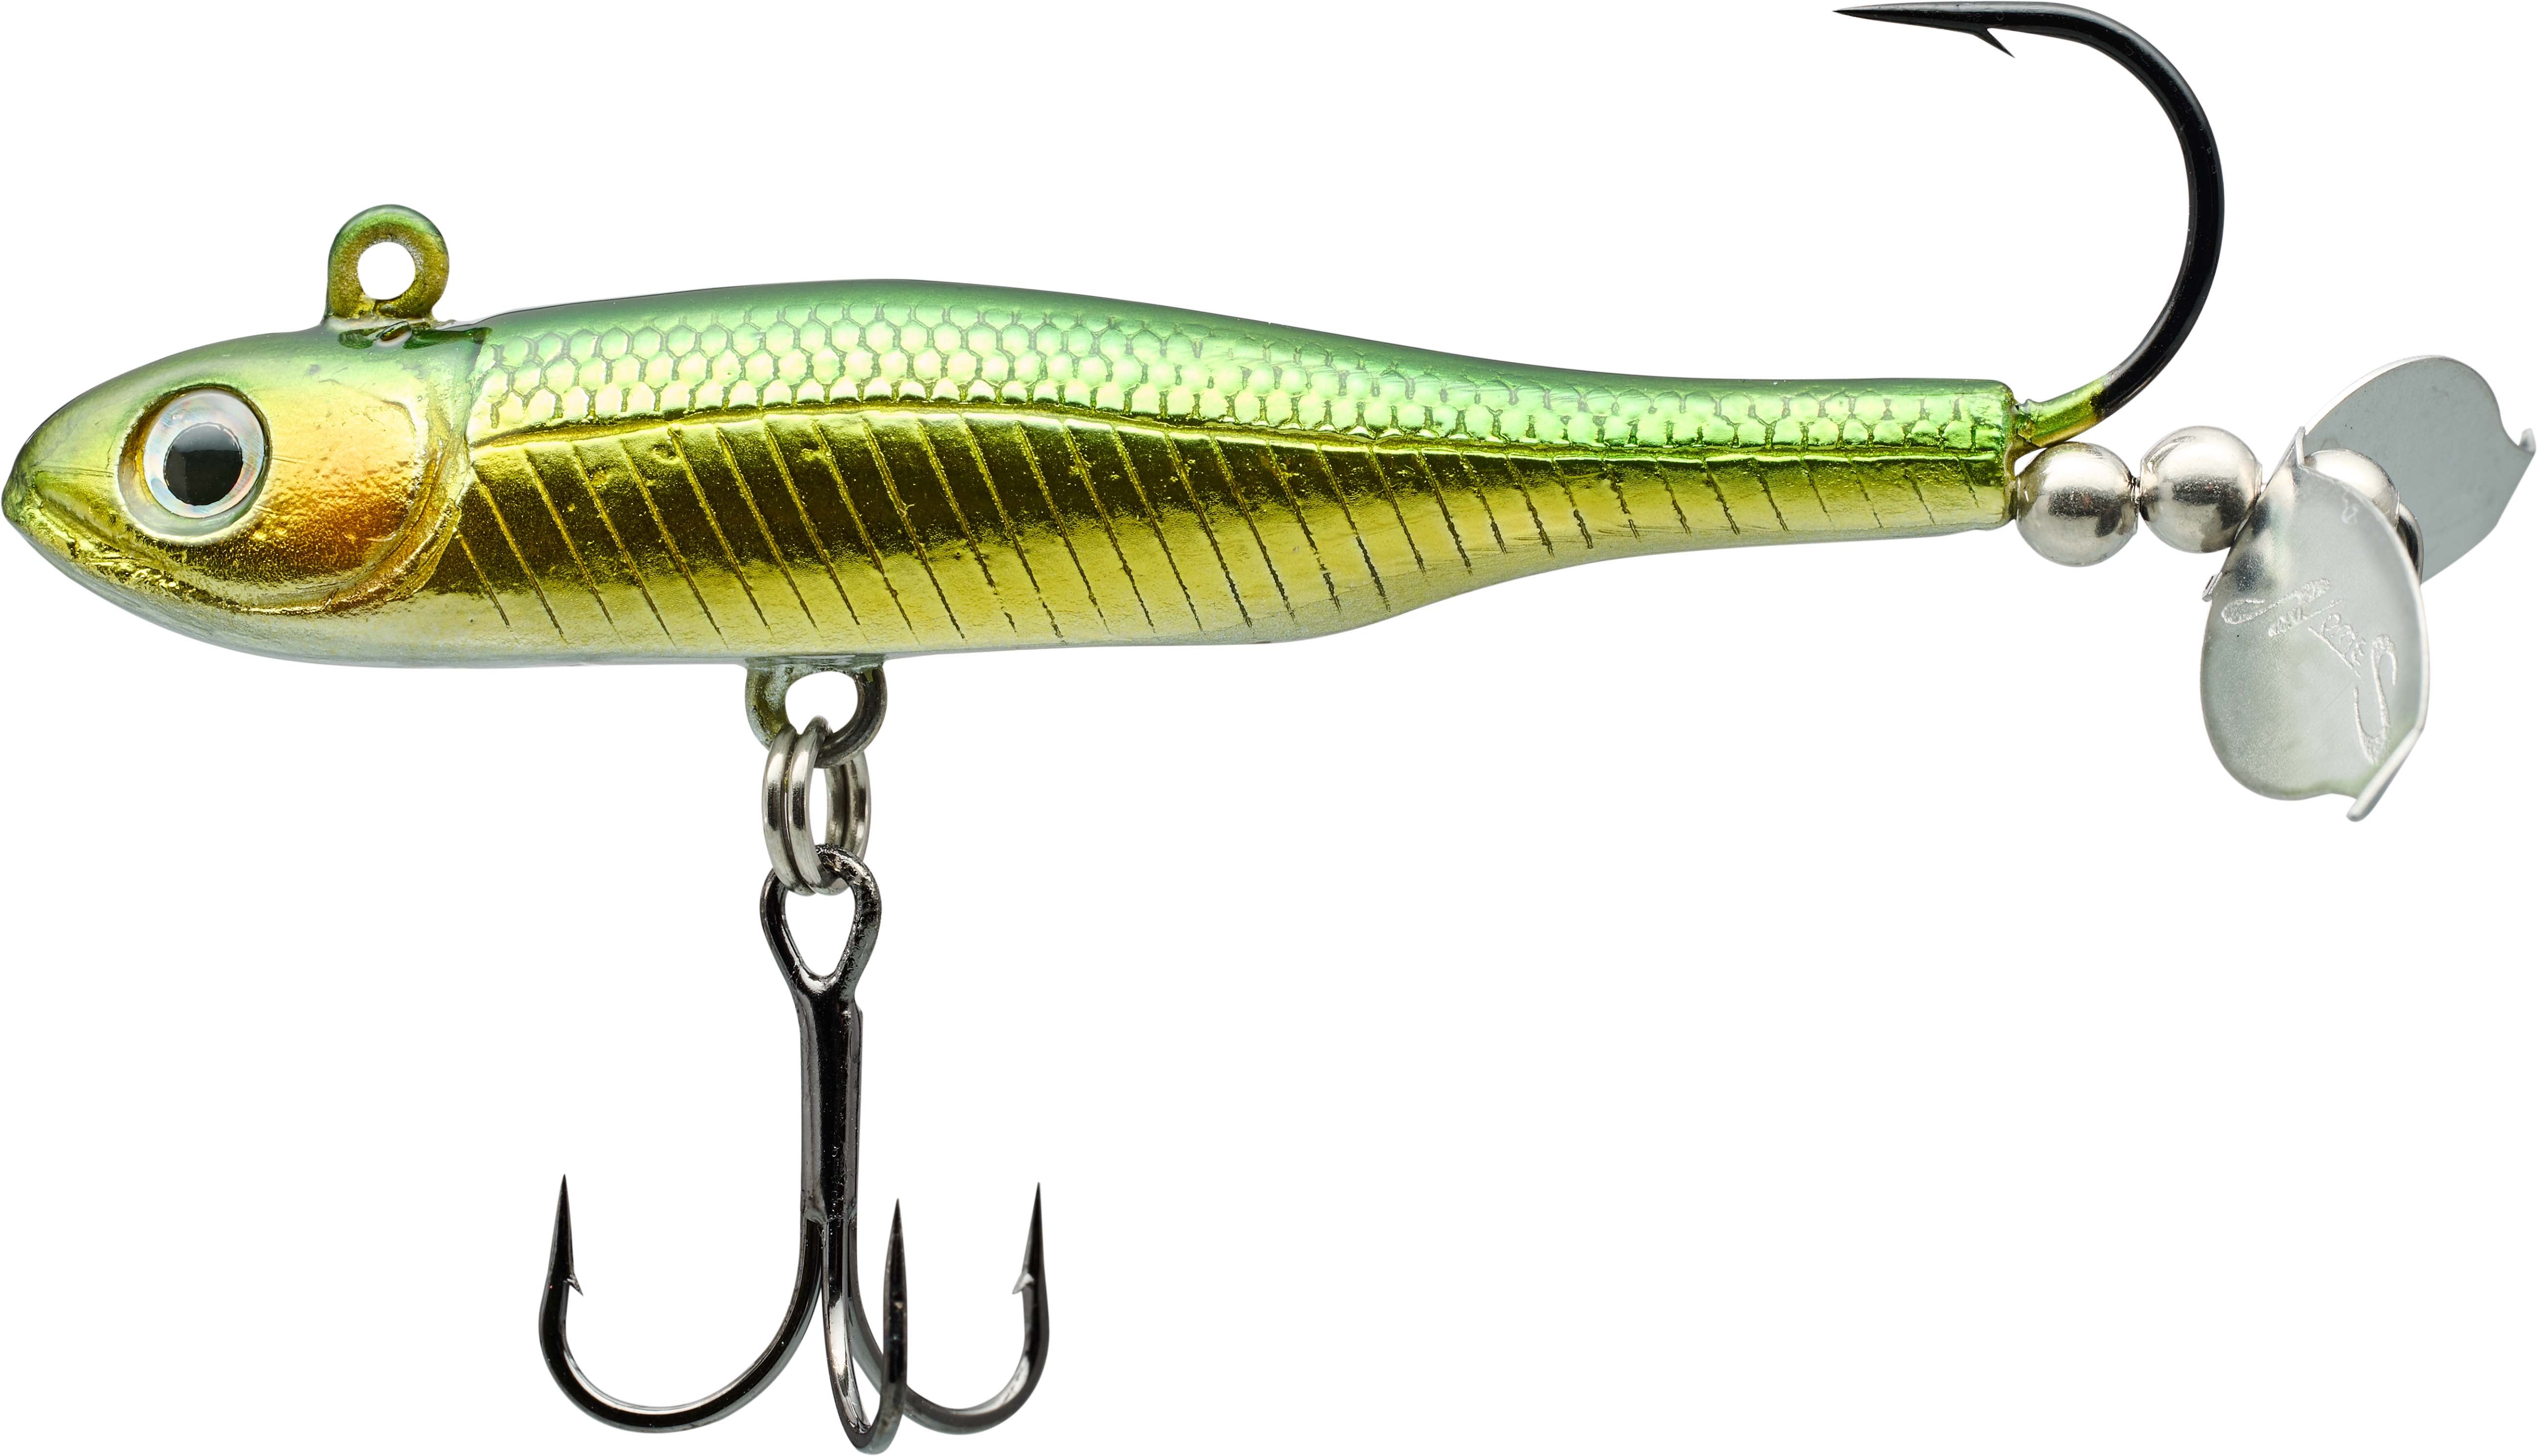 Nories Wrapping Minnow Prop Bait Citrus Shad / 8g